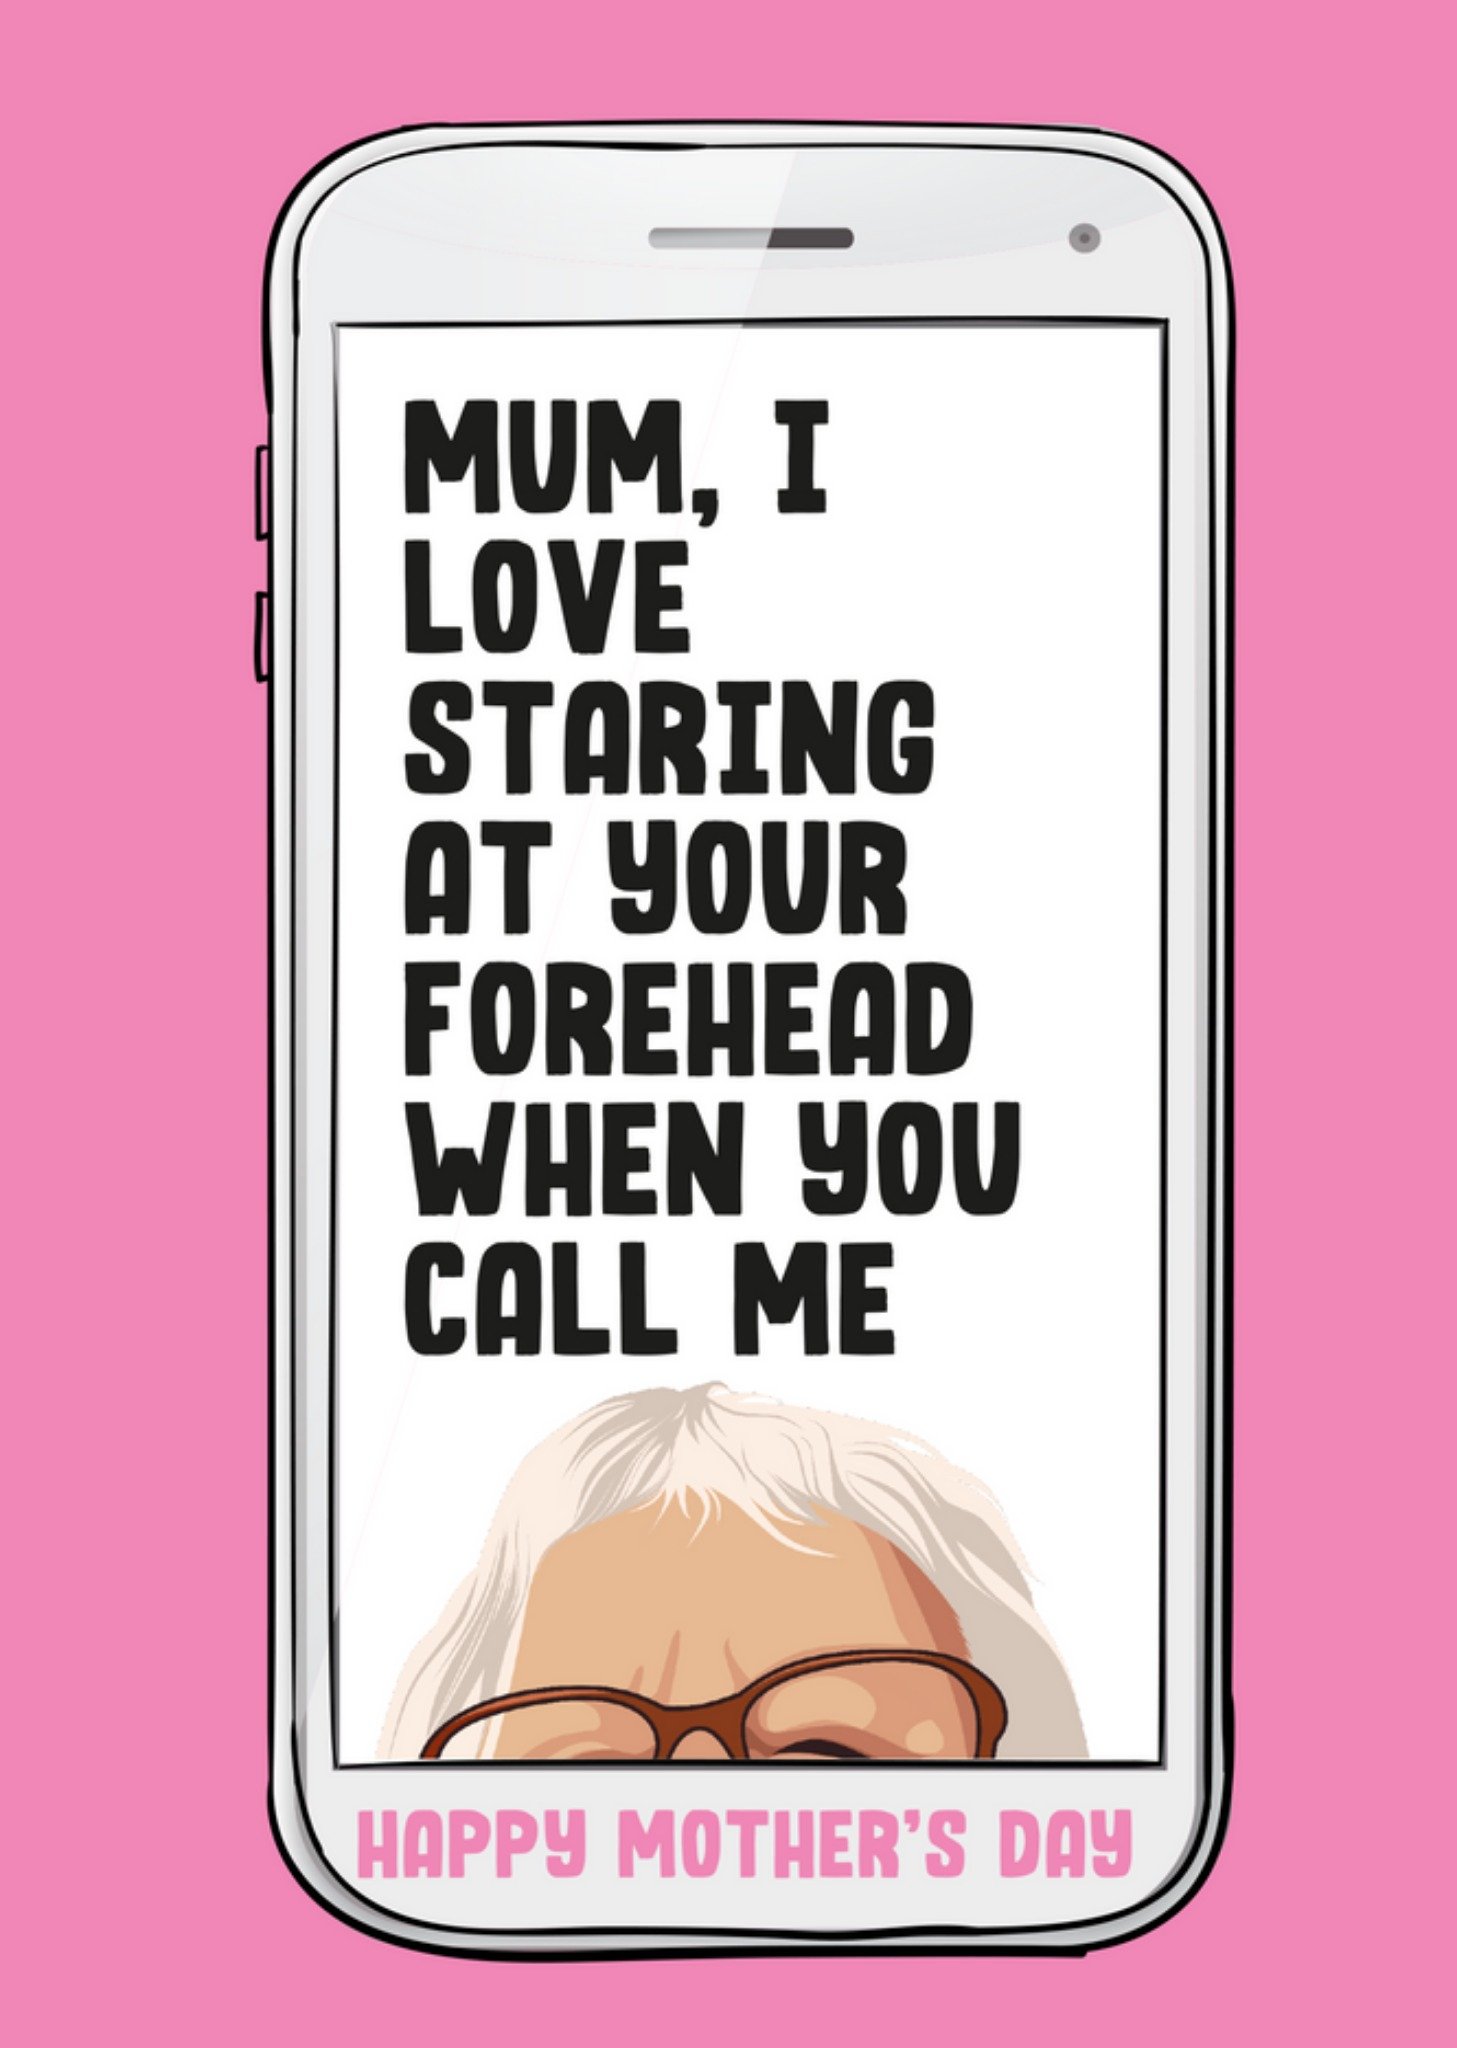 Moonpig Mum I Love Staring At Your Forehead When You Call Me Mothers Day Card, Large